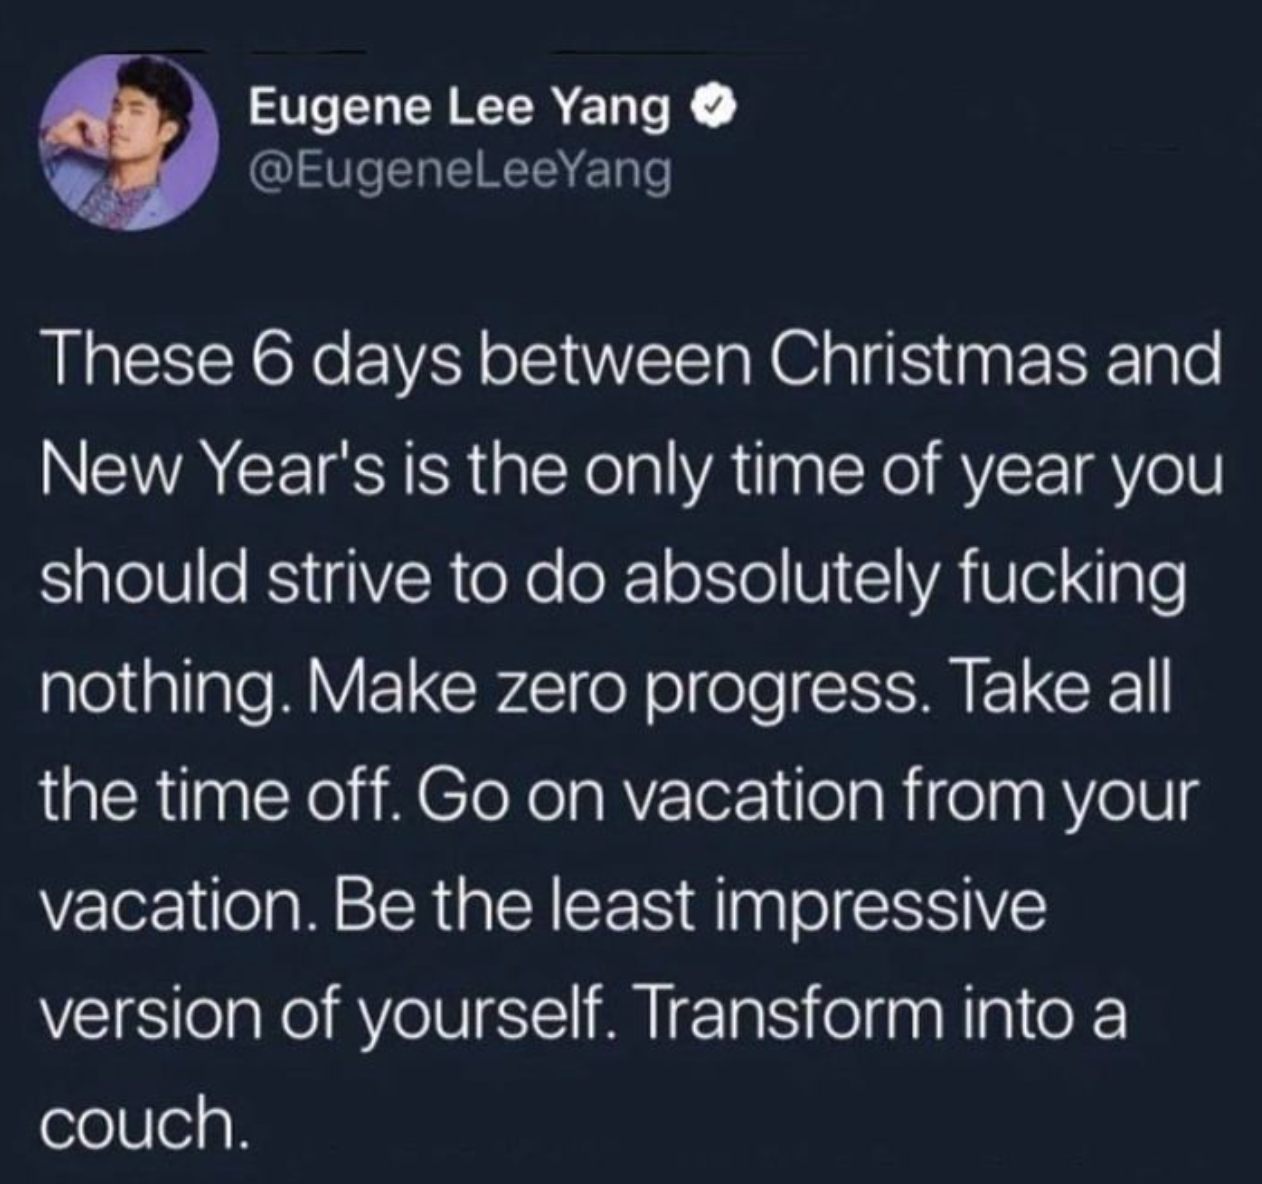 these 6 days between christmas and new year's ever is the only time of year you should strive to do absolutely nothing, make zero progress, go on vacation from your vacation, transform into a couch